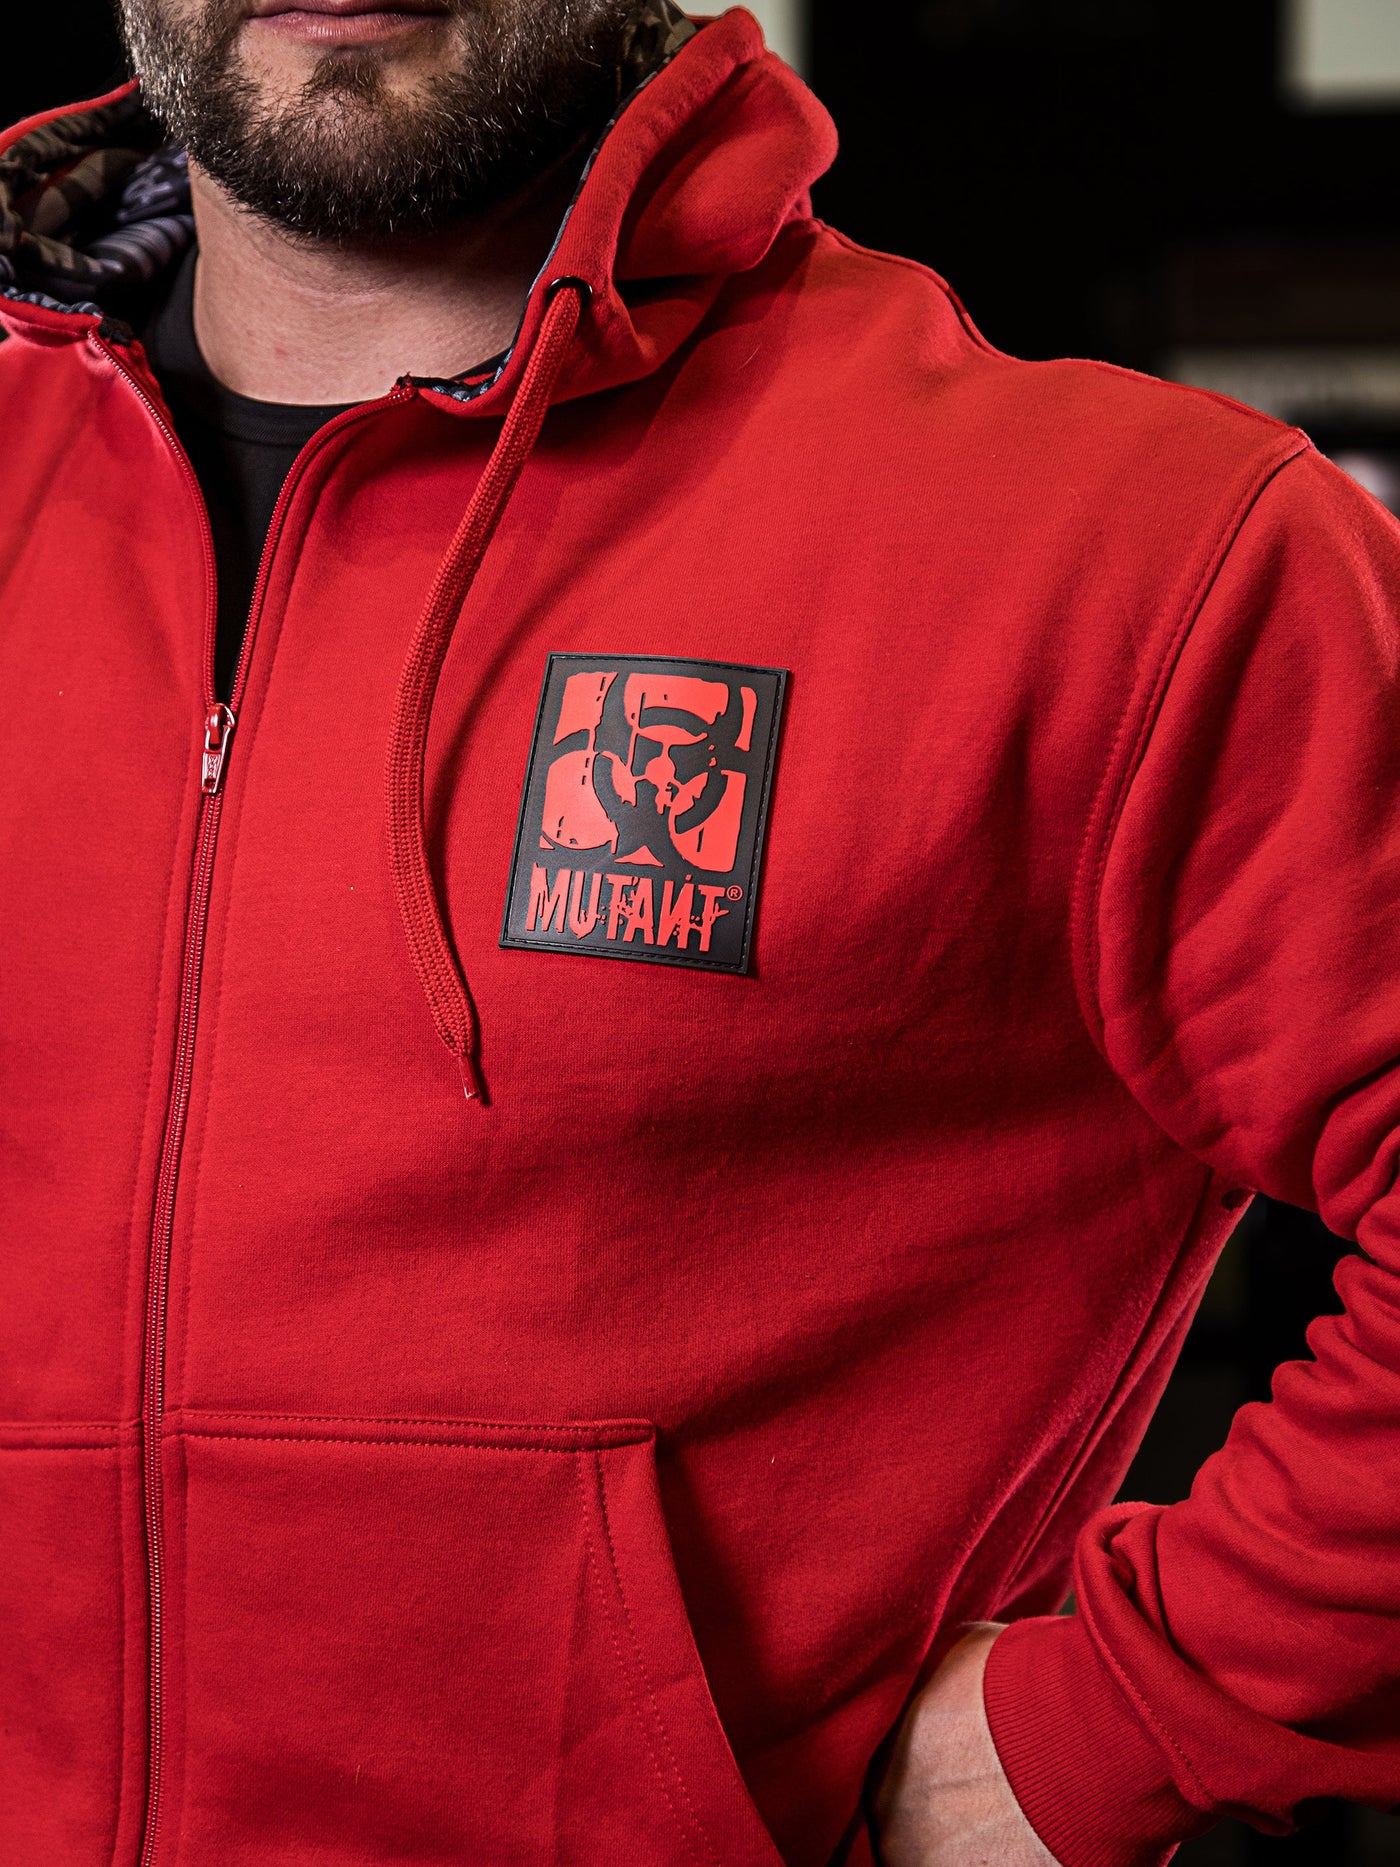 Close-up photo of a Mutant athlete wearing the red Mutant Patched Zip-Up Gym Hoodie. The image focuses on the black and red Mutant logo patch on the left chest, showcasing the intricate details.